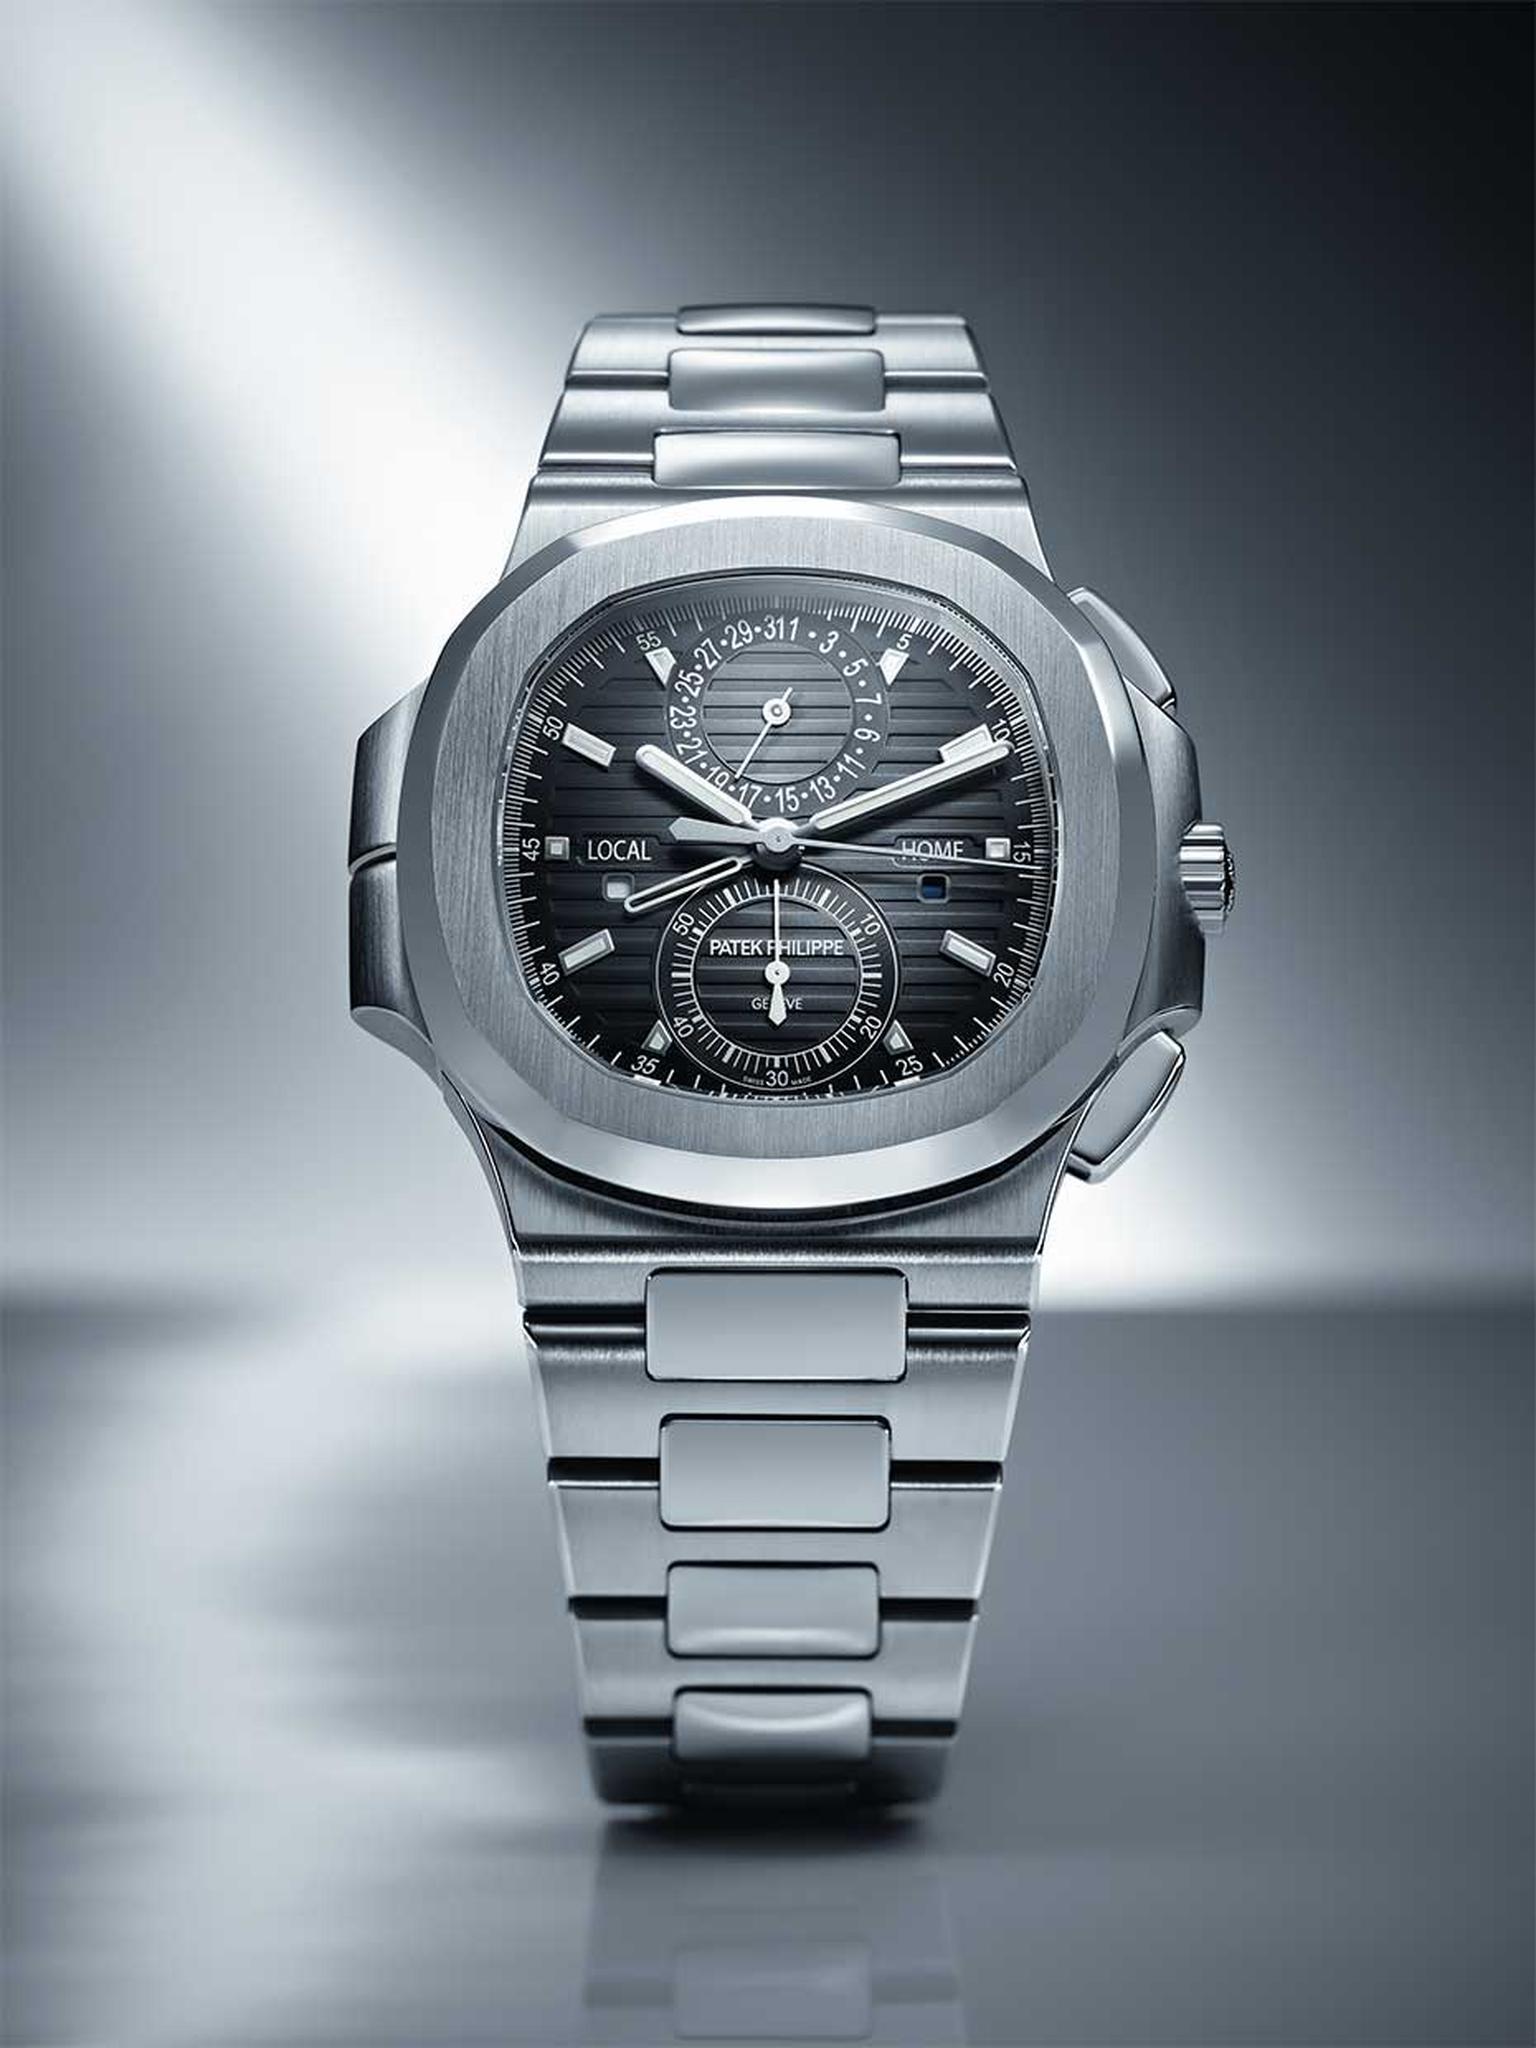 The Patek Philippe Nautilus watch, designed in 1976 by Gérald Genta, was housed, like the Royal Oak, in a stainless steel case.